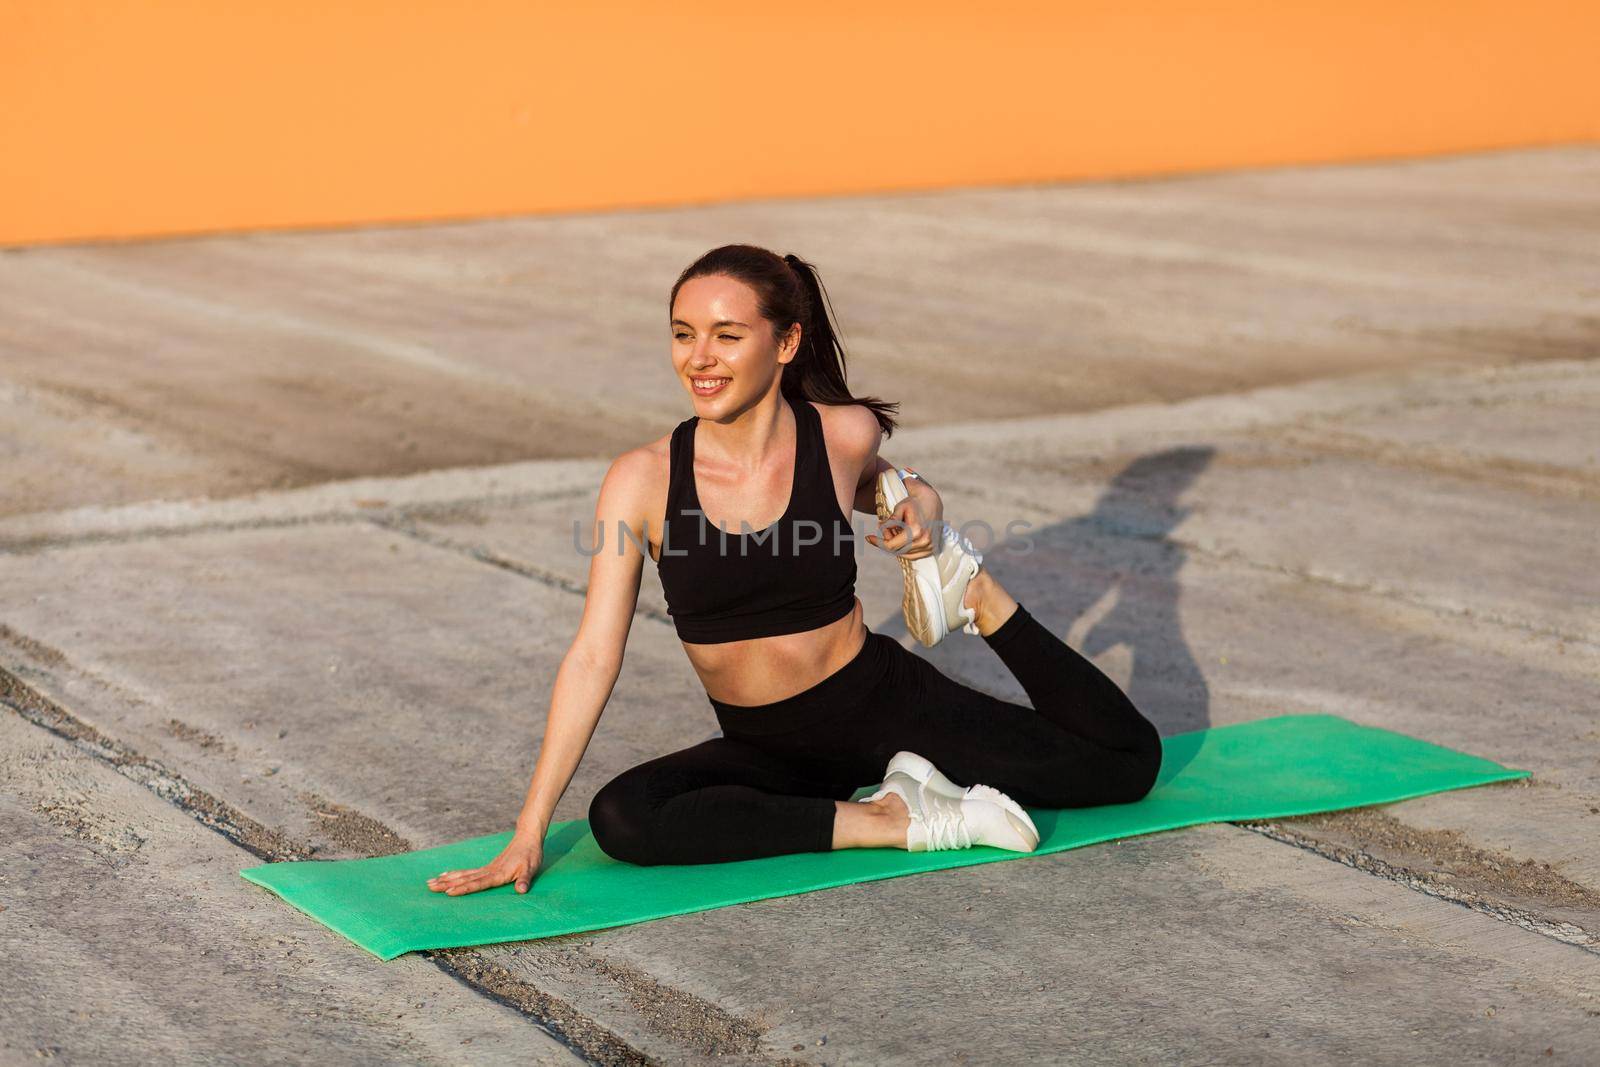 Smiling athletic girl in tight sportswear, black pants and top, practicing yoga, doing one-legged king pigeon pose, stretching leg muscles for better flexibility. Health care, sport activity outdoor